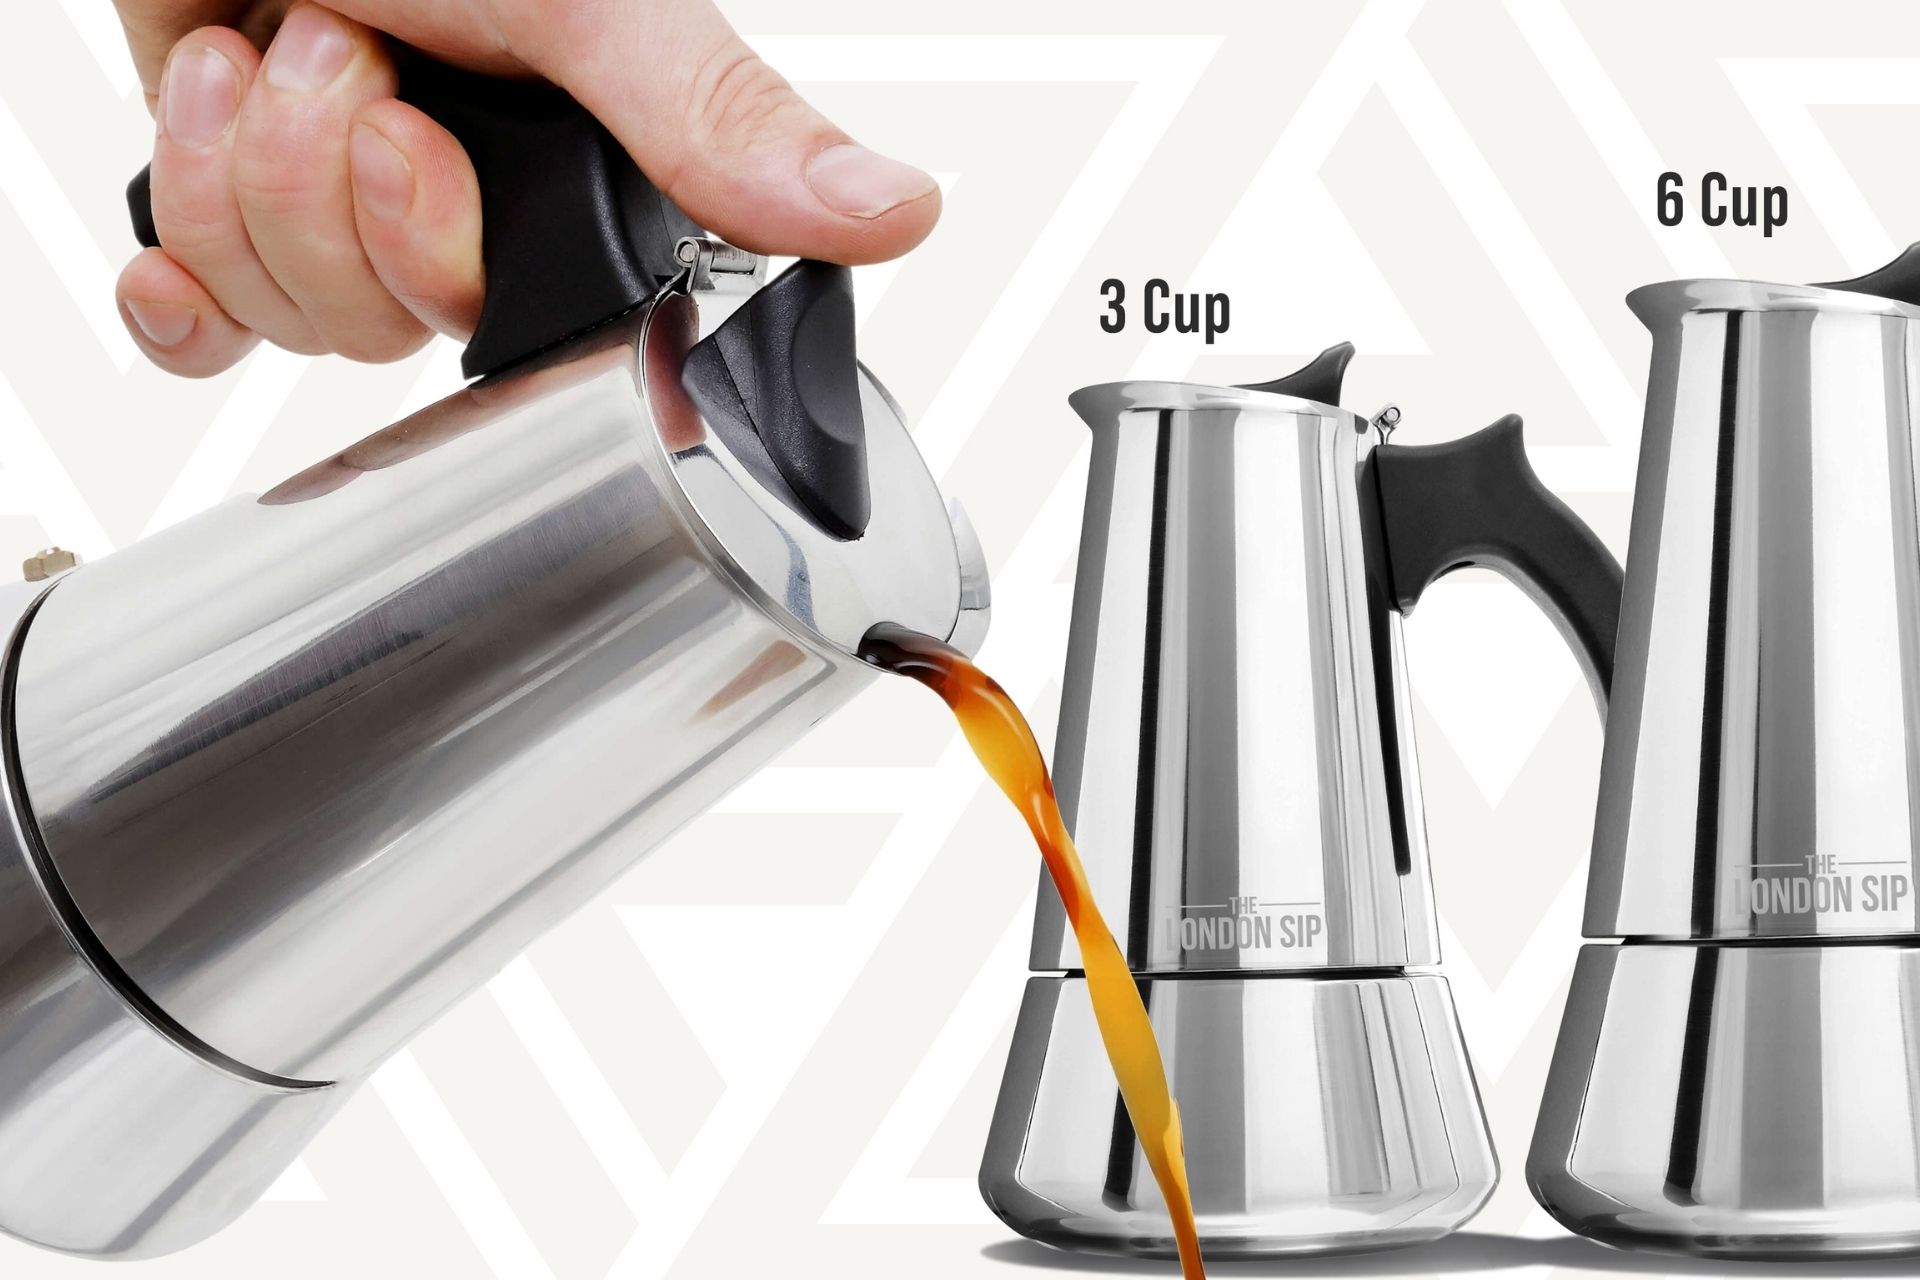 London Sip 3 Cup Stainless Steel Espresso Maker